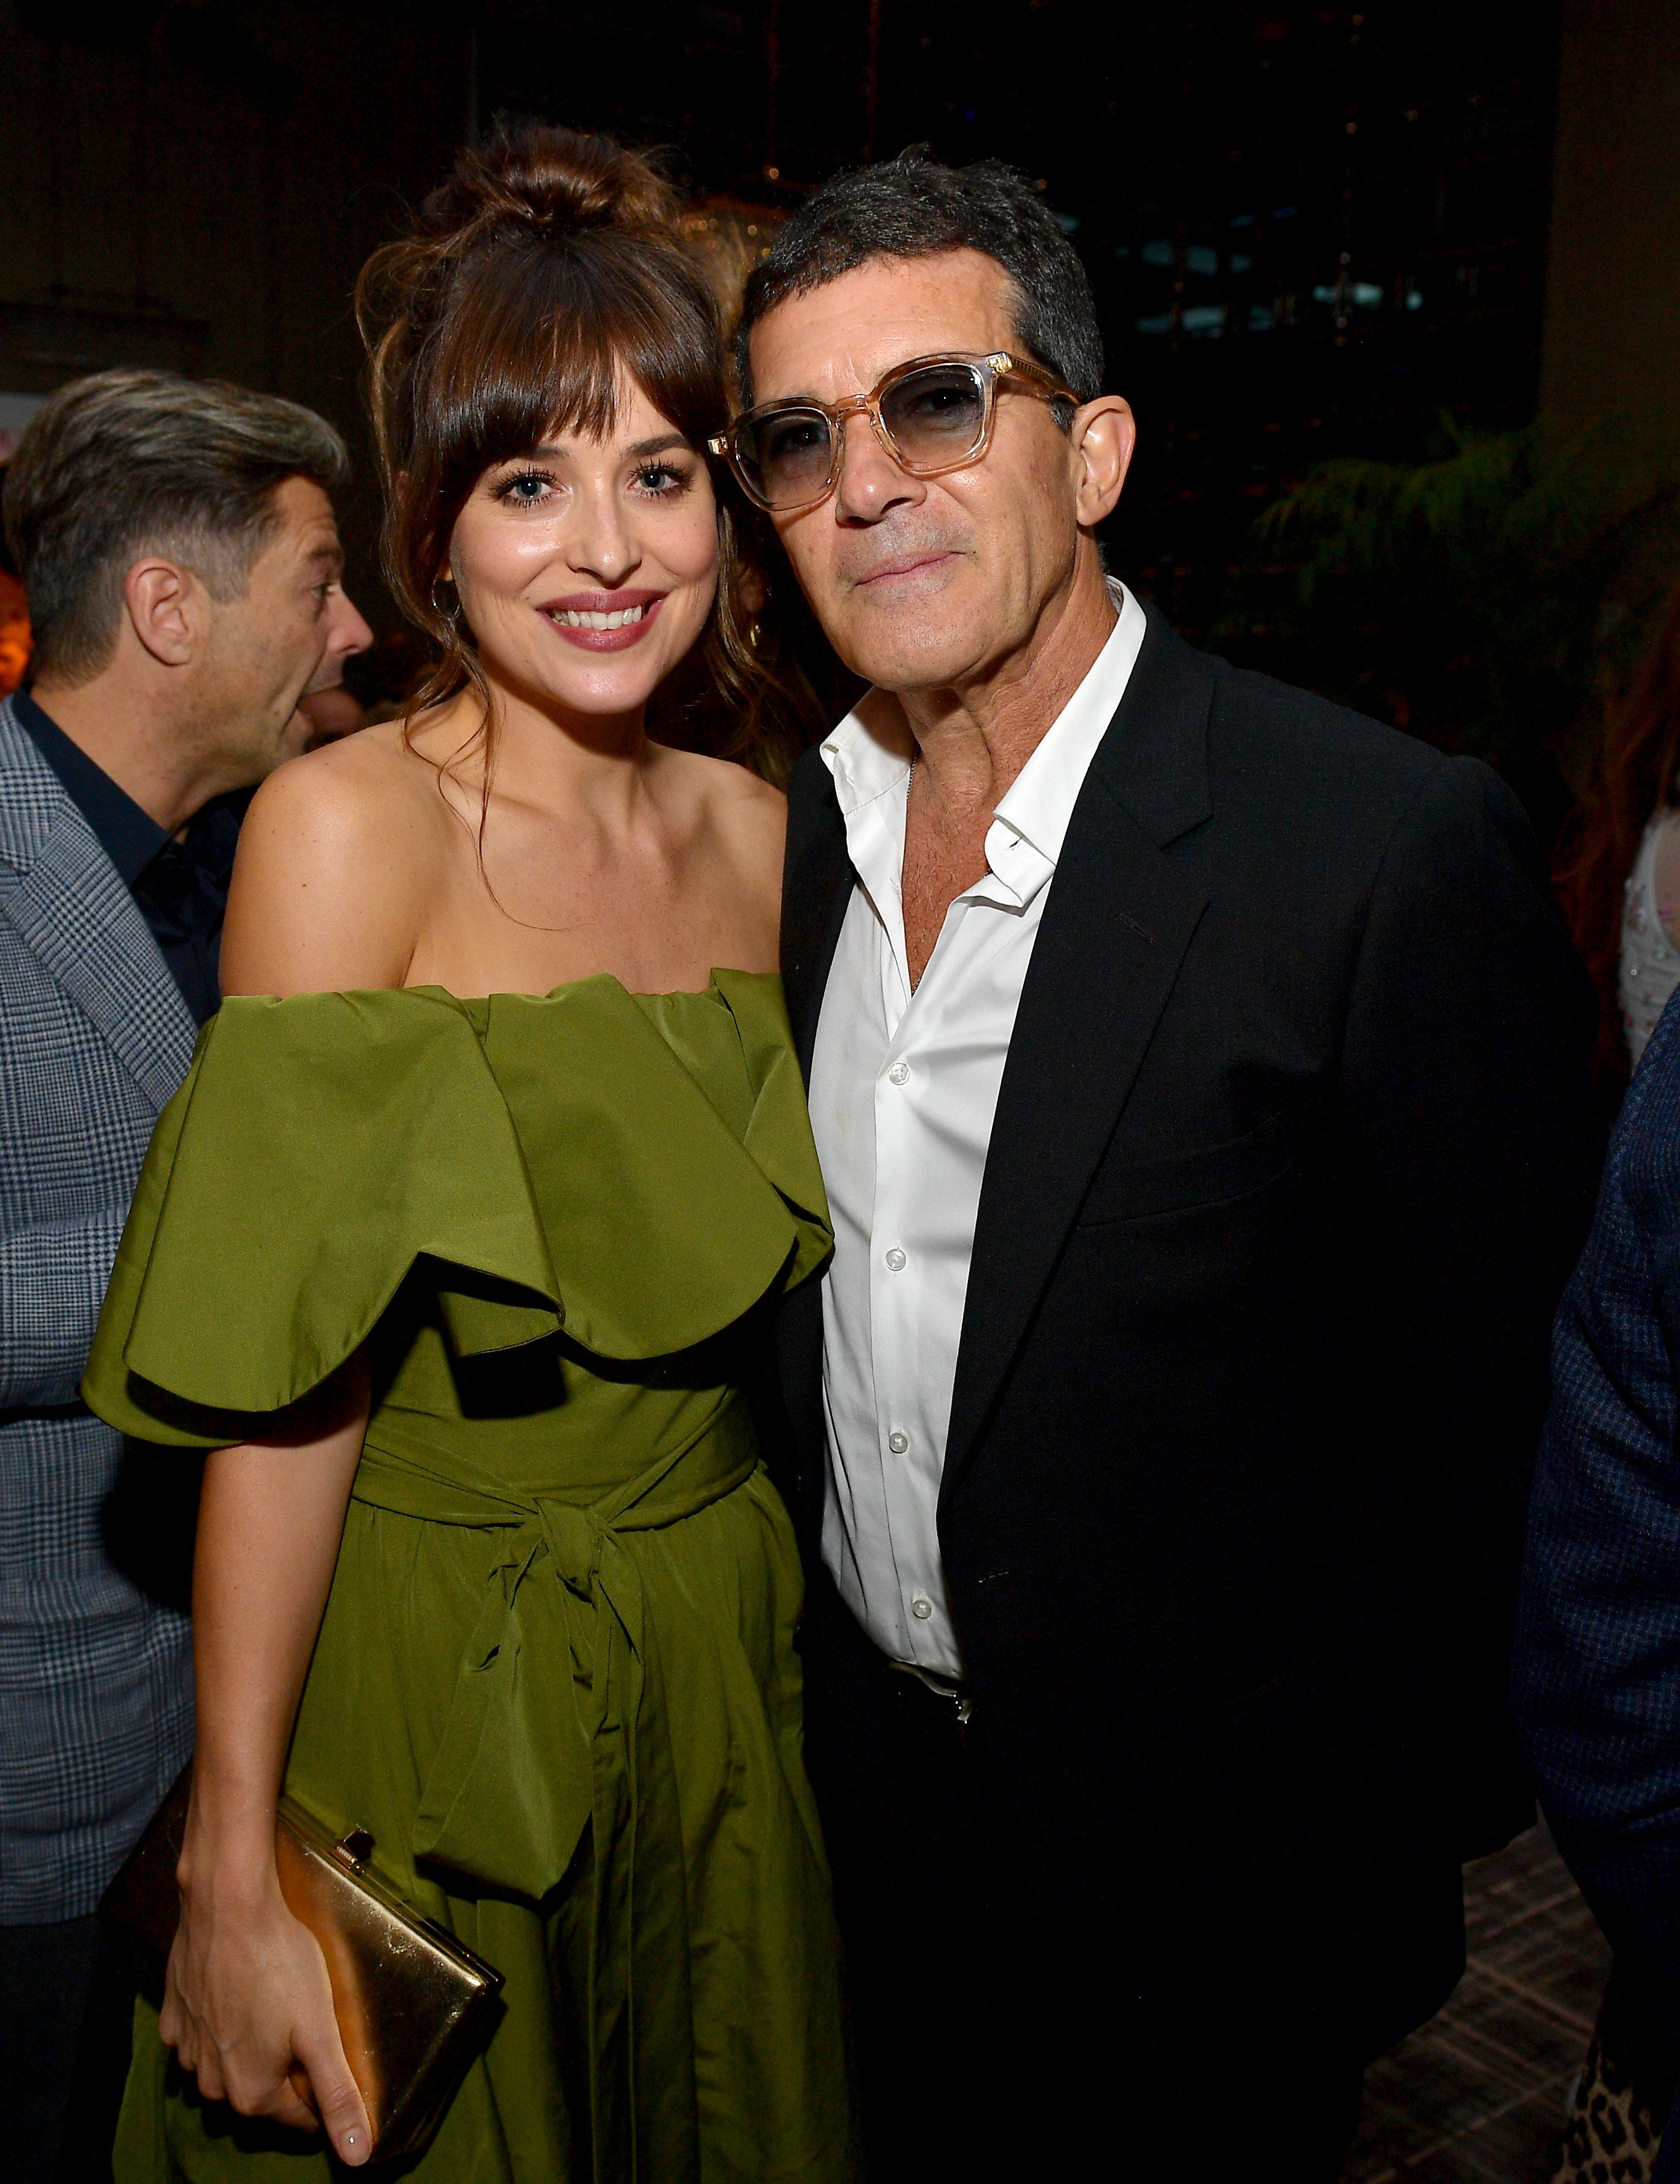 Dakota Johnson and Antonio Banderas at The Hollywood Foreign Press Association and The Hollywood Reporter party at the Toronto International Film Festival on September 7, 2019, in Toronto, Canada | Source: Getty Images